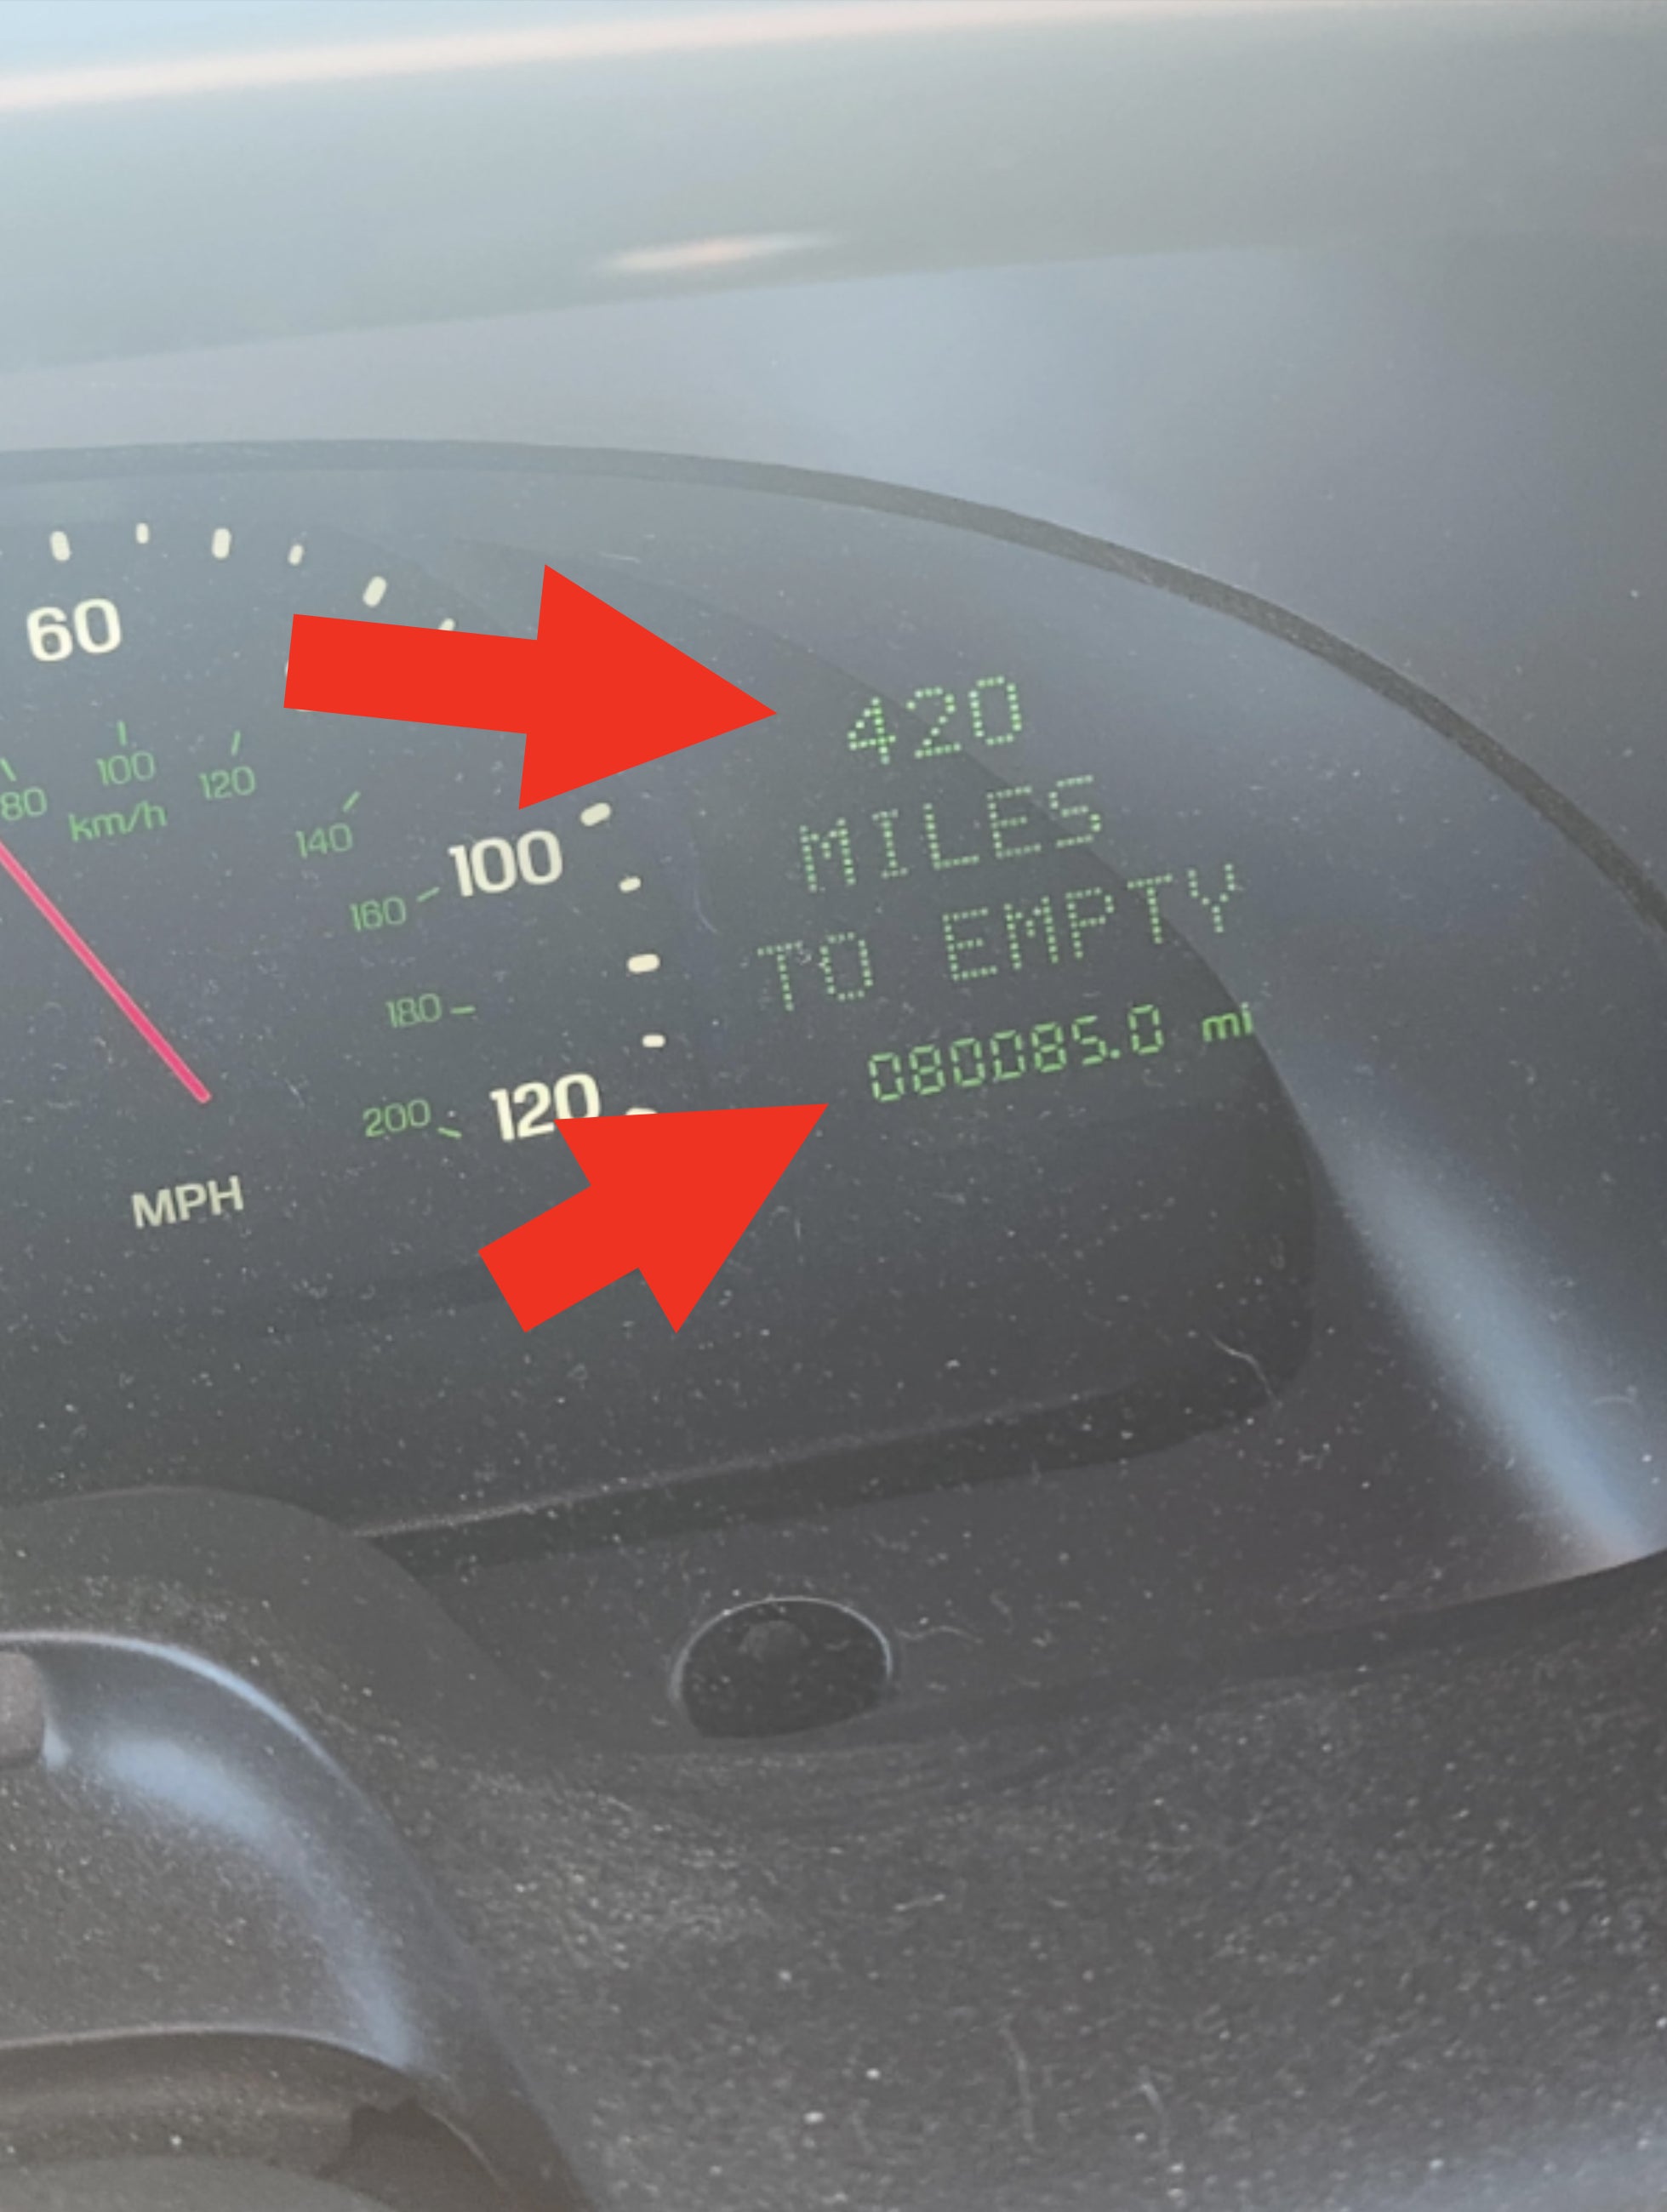 Car dashboard displaying 420 miles to empty with an odometer reading of 88085.0 miles